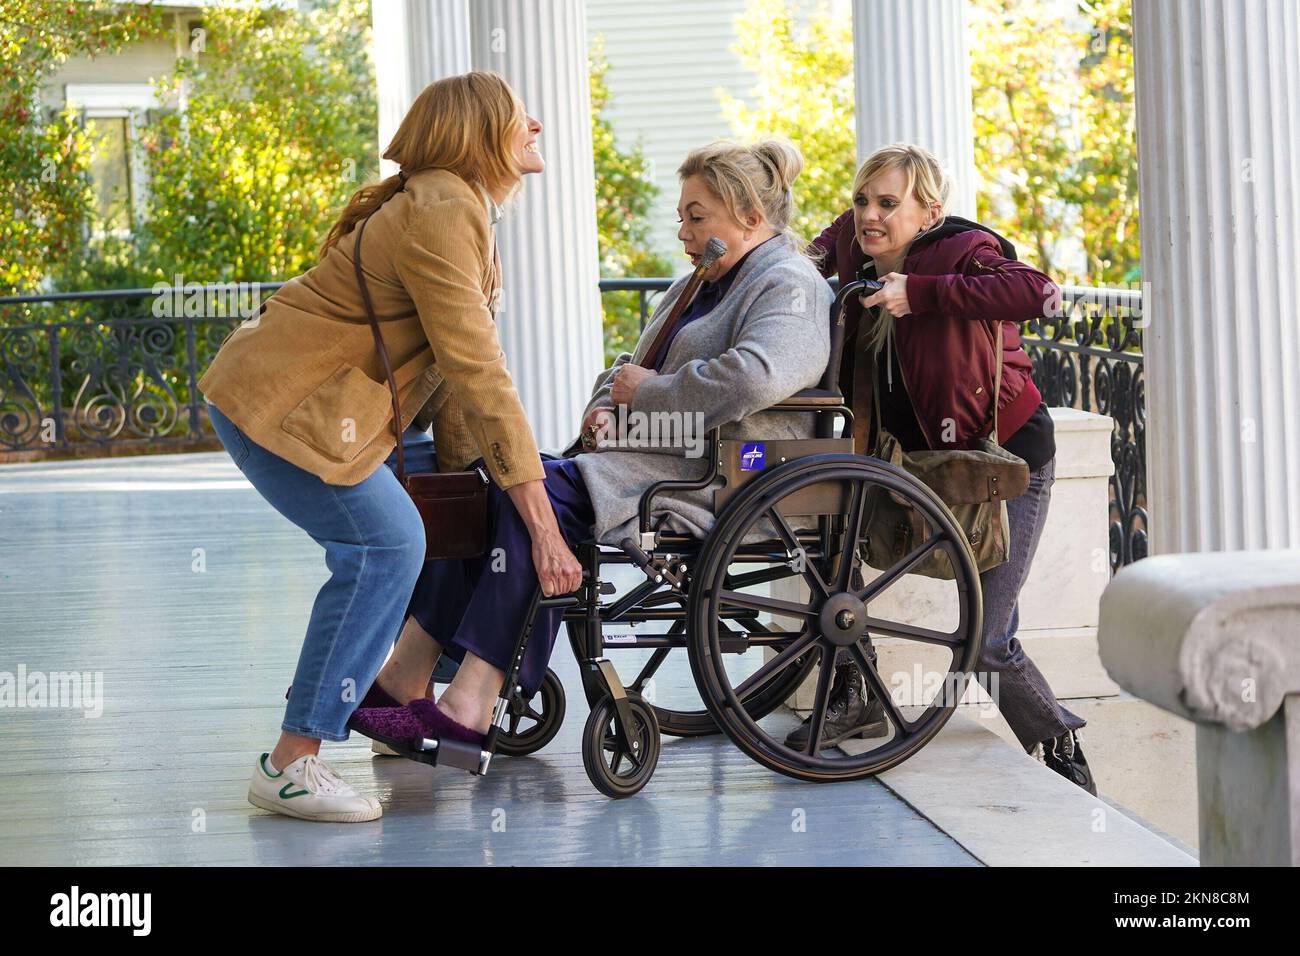 KATHLEEN TURNER, TONI COLLETTE and ANNA FARIS in THE ESTATE (2022), directed by DEAN CRAIG. Credit: SIGNATURE FILMS / Album Stock Photo